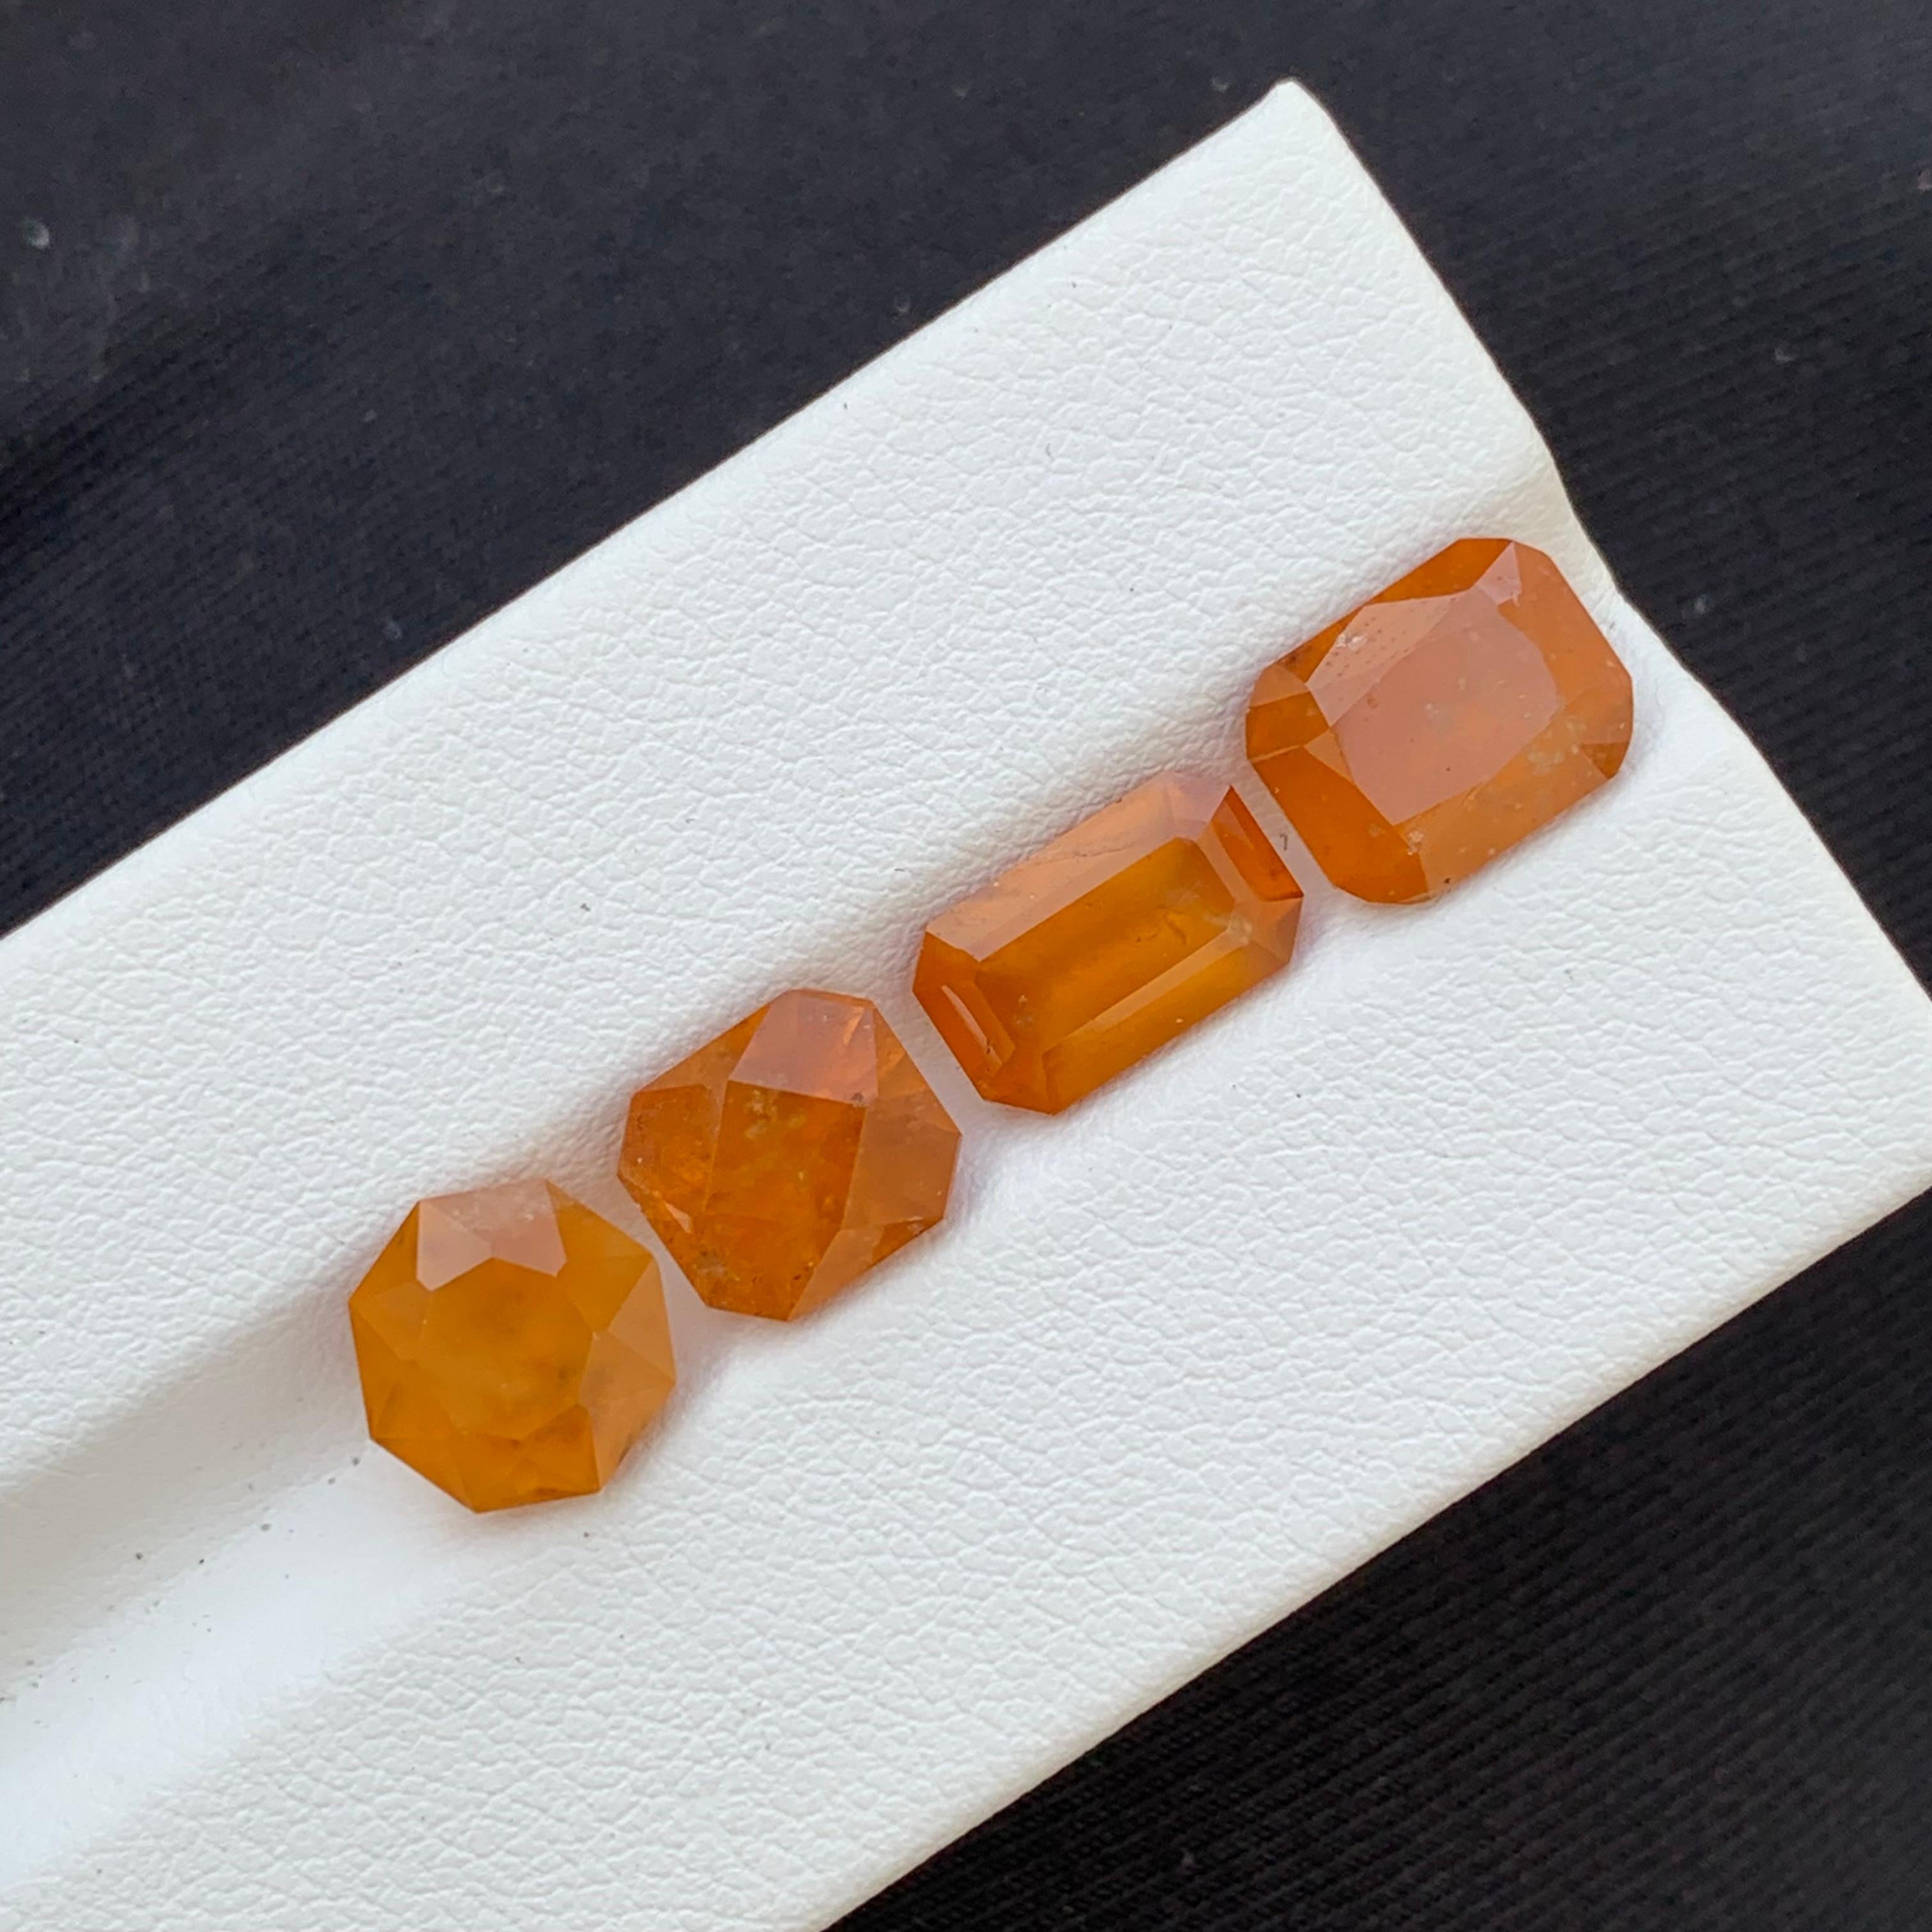  12.40 Carats Fanta Natural Loose Hessonite Smoky Garnet Lot For Jewelry Making For Sale 2